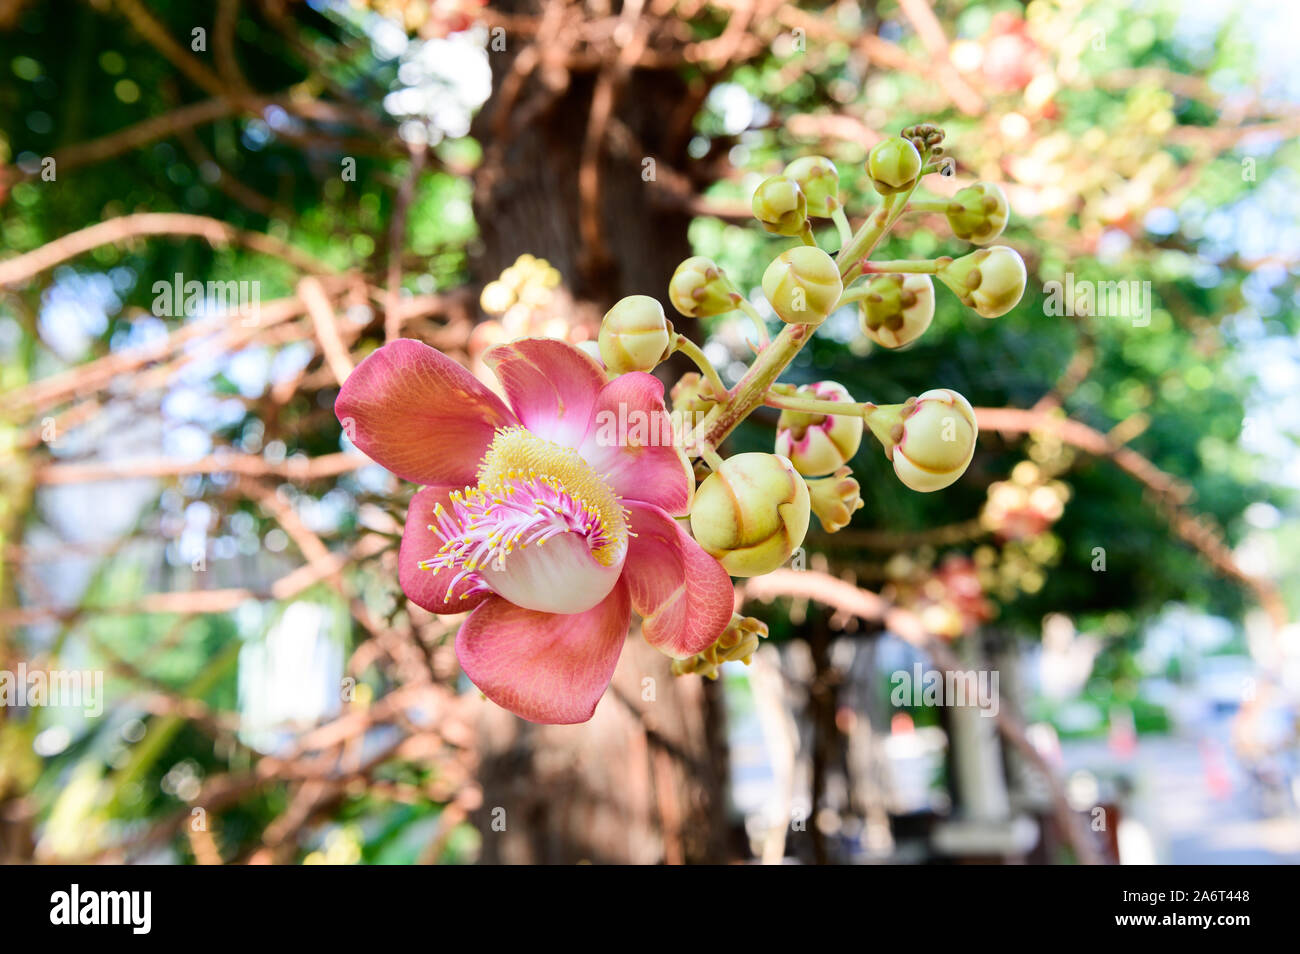 Shorea robusta or Cannonball flower from the tree Stock Photo